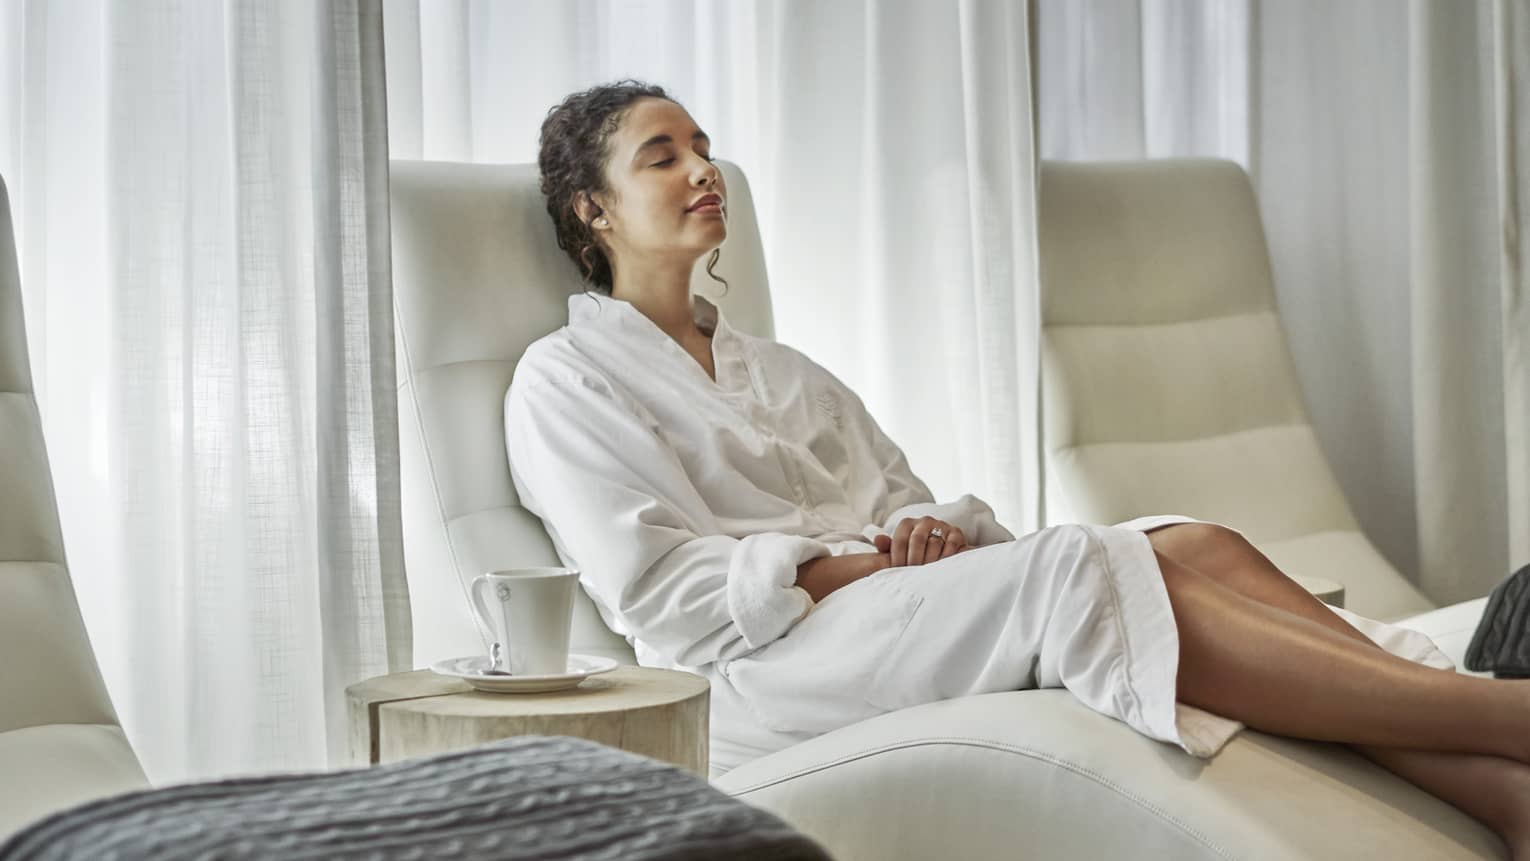 A woman in a white robe lounges on a curved chair after a spa treatment.